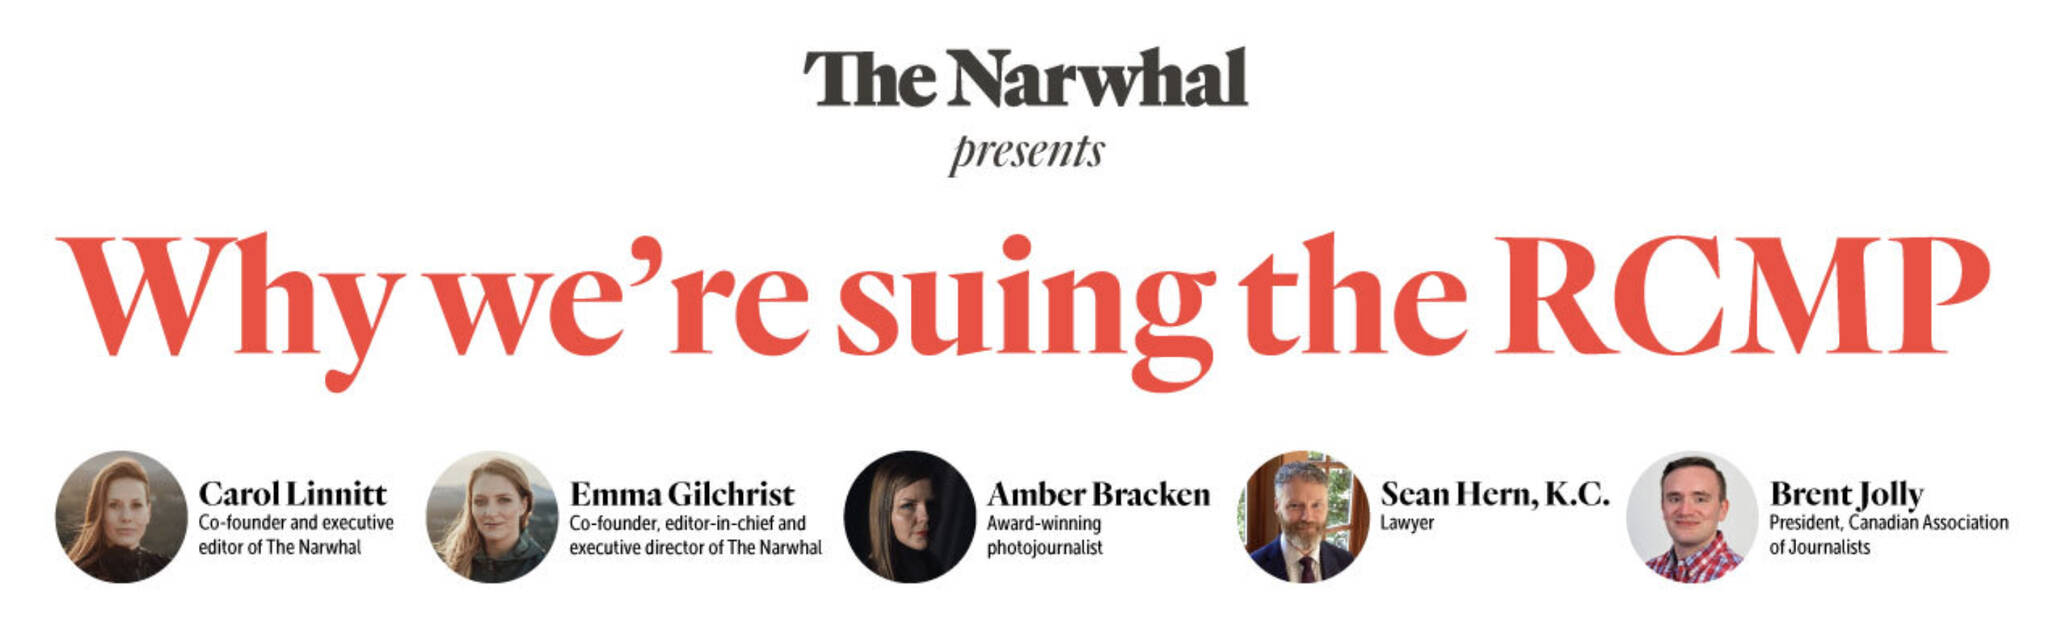 The Narwhal's branding features prominently in promotions of its lawsuit. (The Narwhal's website)